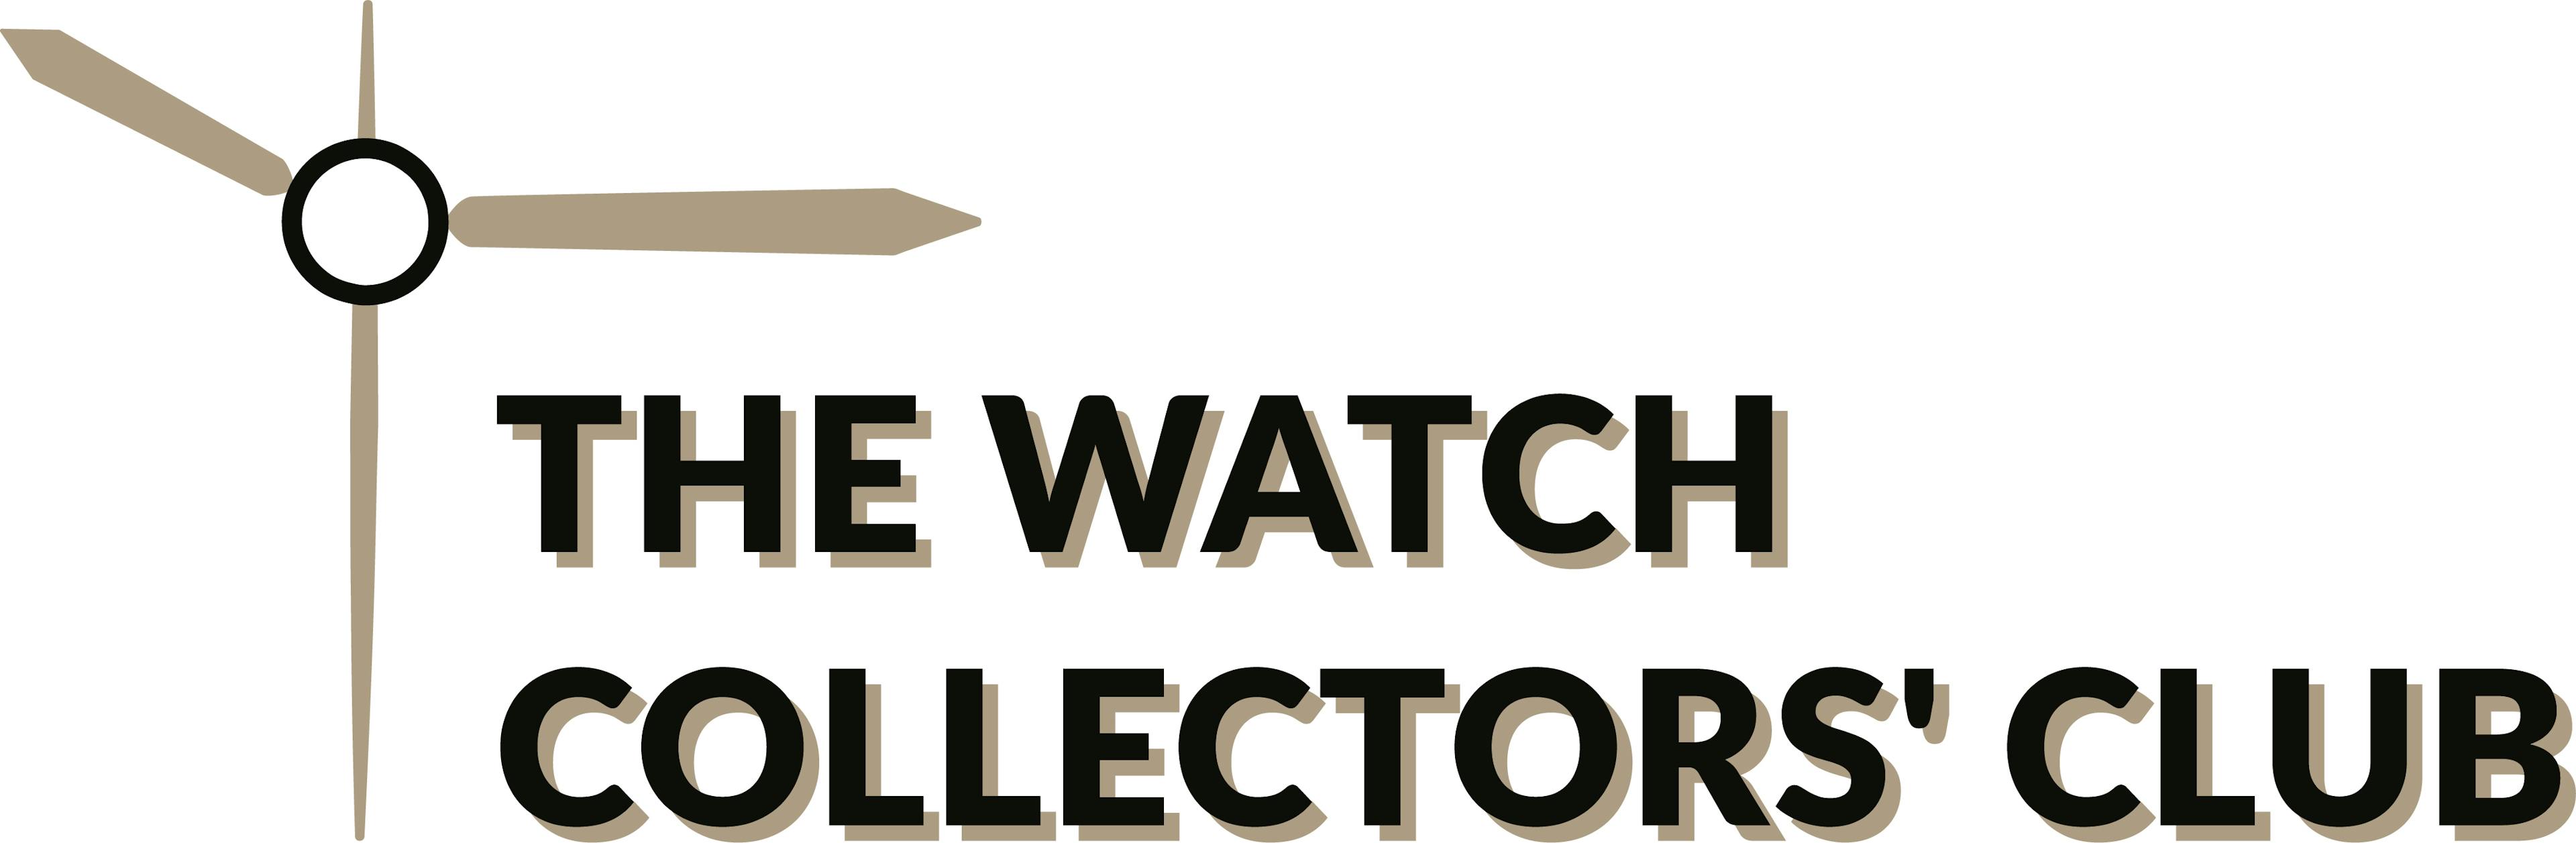 The Watch Collectors' Club Logo. We're hoping this will be known everywhere anyone wears a watch.